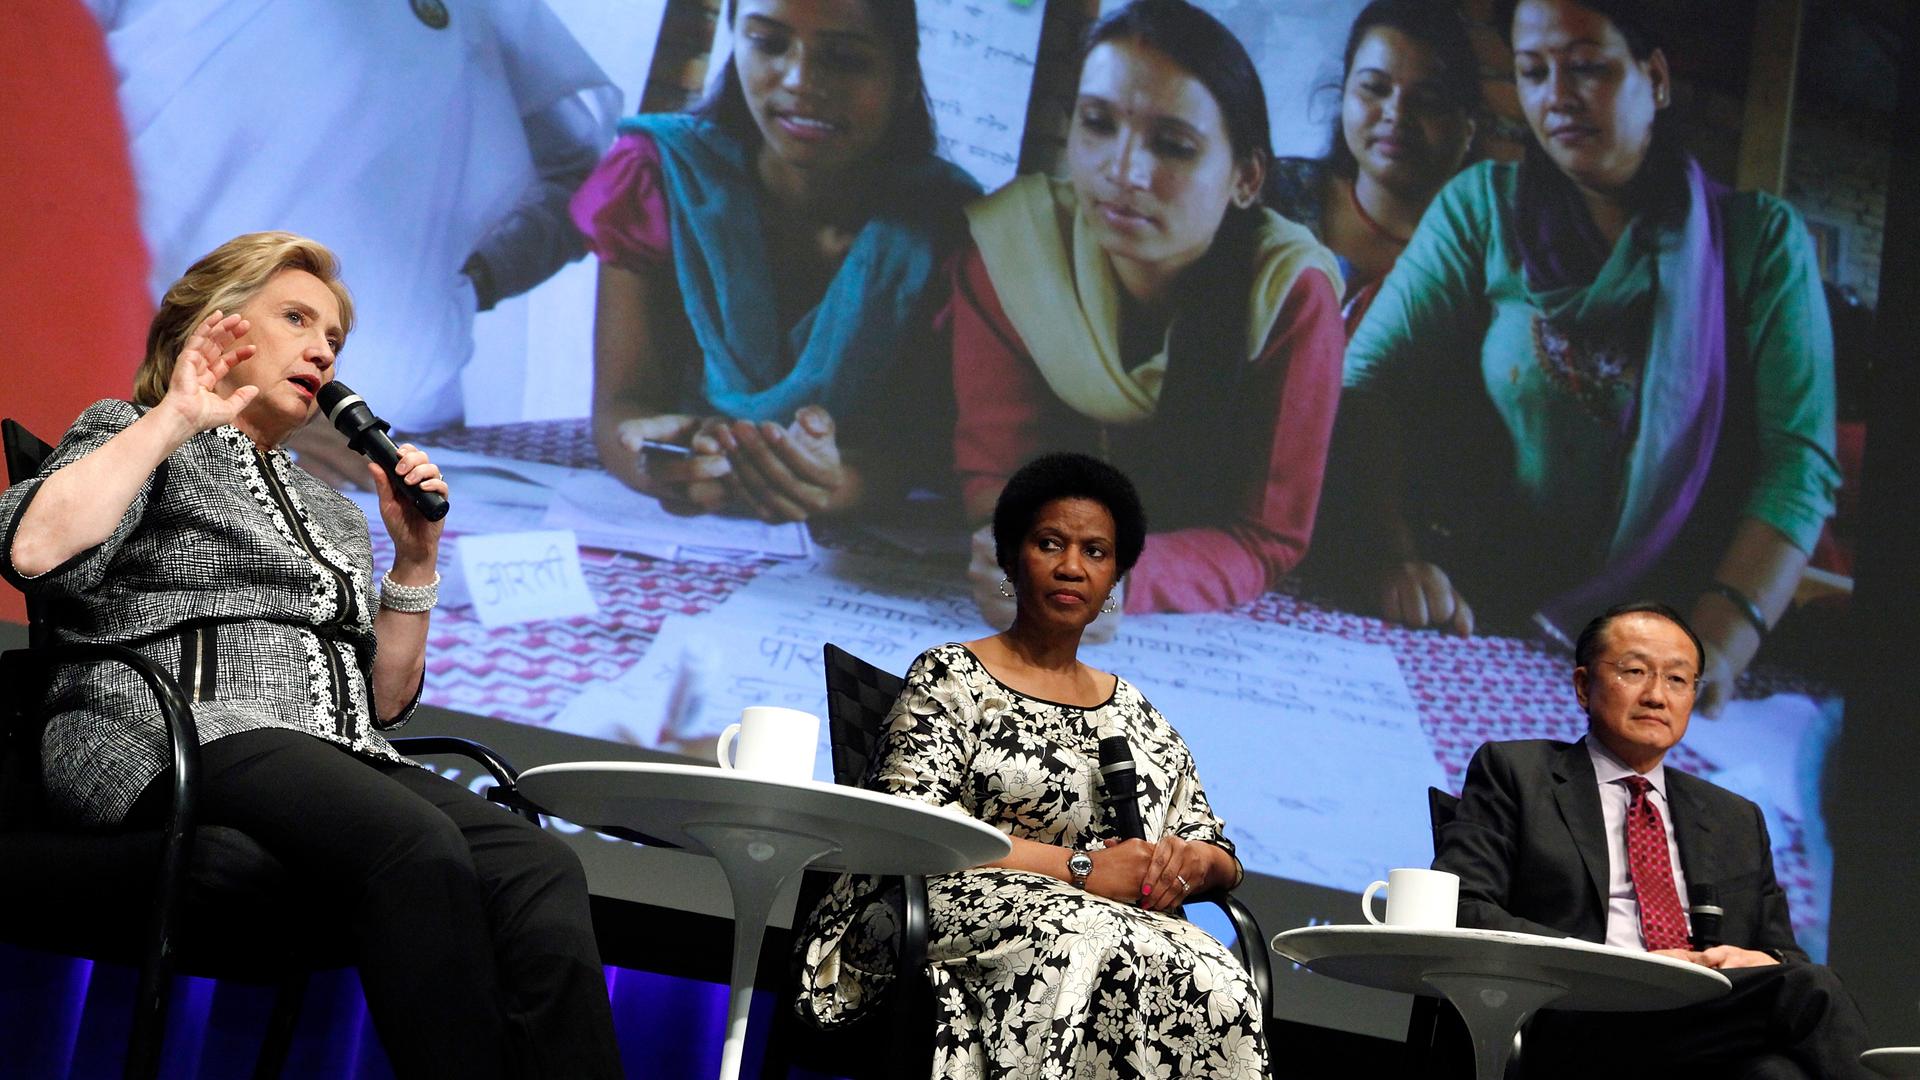 UN Women Executive Director Phumzile Mlambo-Ngcuka (C), former US Secretary of State Hillary Clinton (L) and World Bank Group President Jim Yong Kim (R) participate in an event on empowering woman and girls, at the World Bank. 